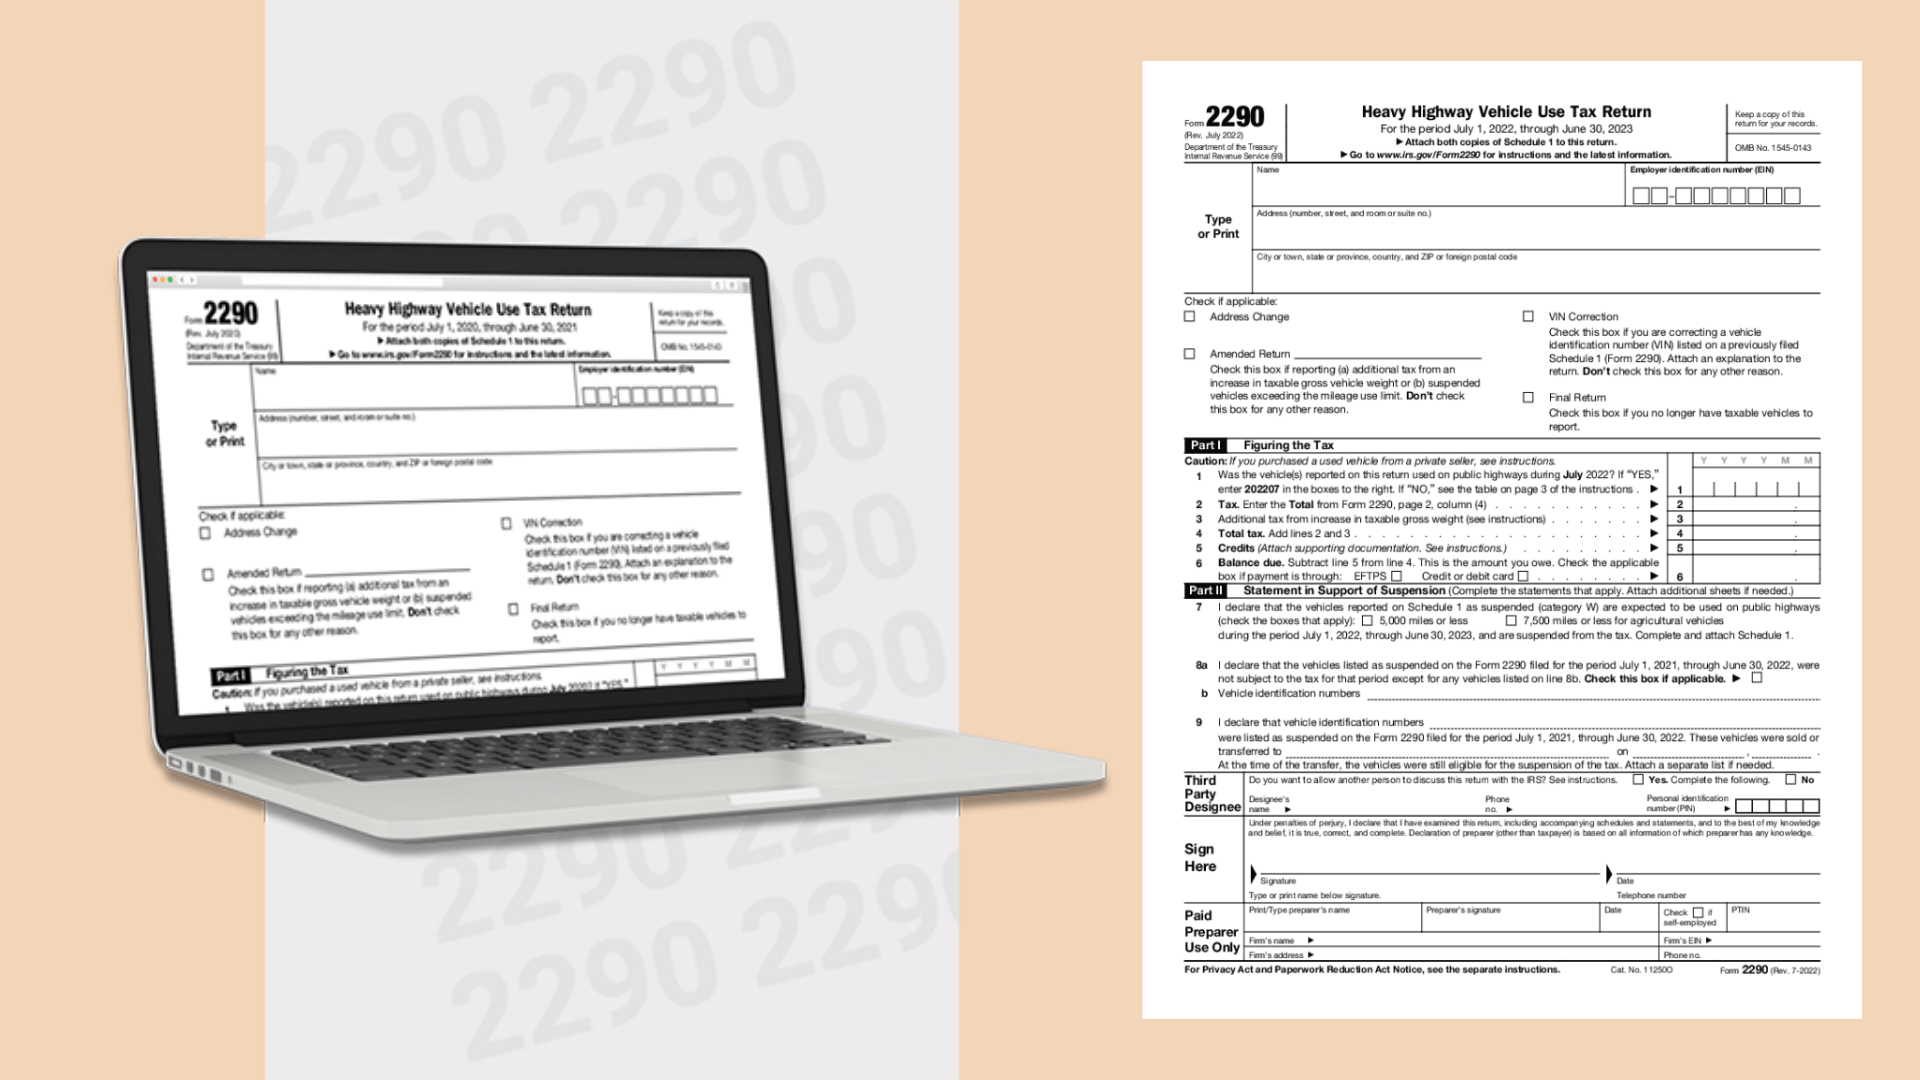 IRS Form 2290 Printable (2022) 2290 Tax Form, Online Instructions